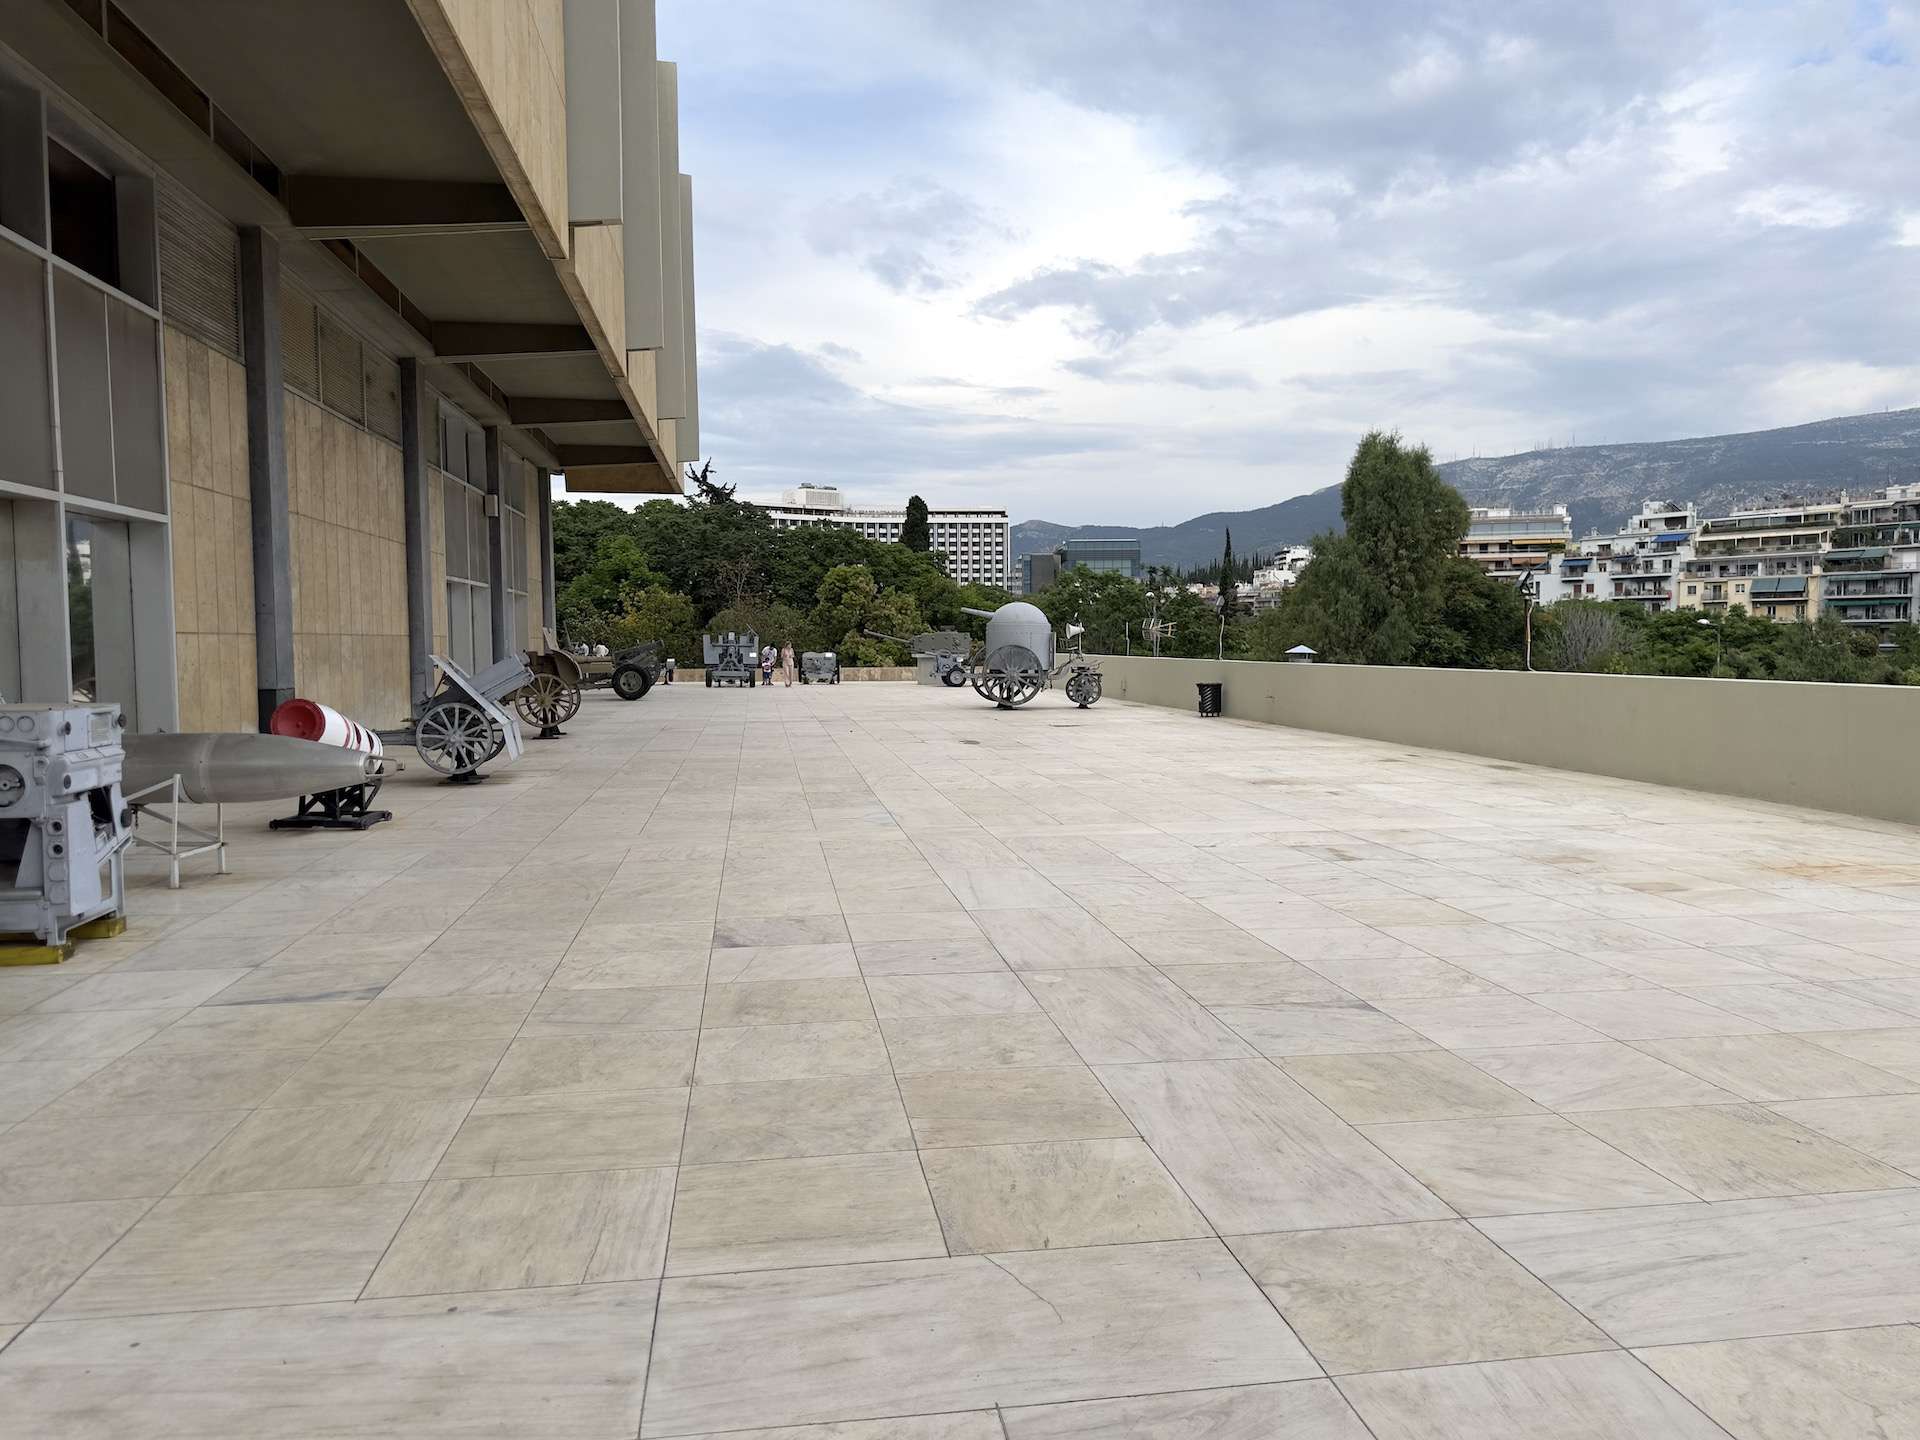 South terrace at the War Museum in Athens, Greece